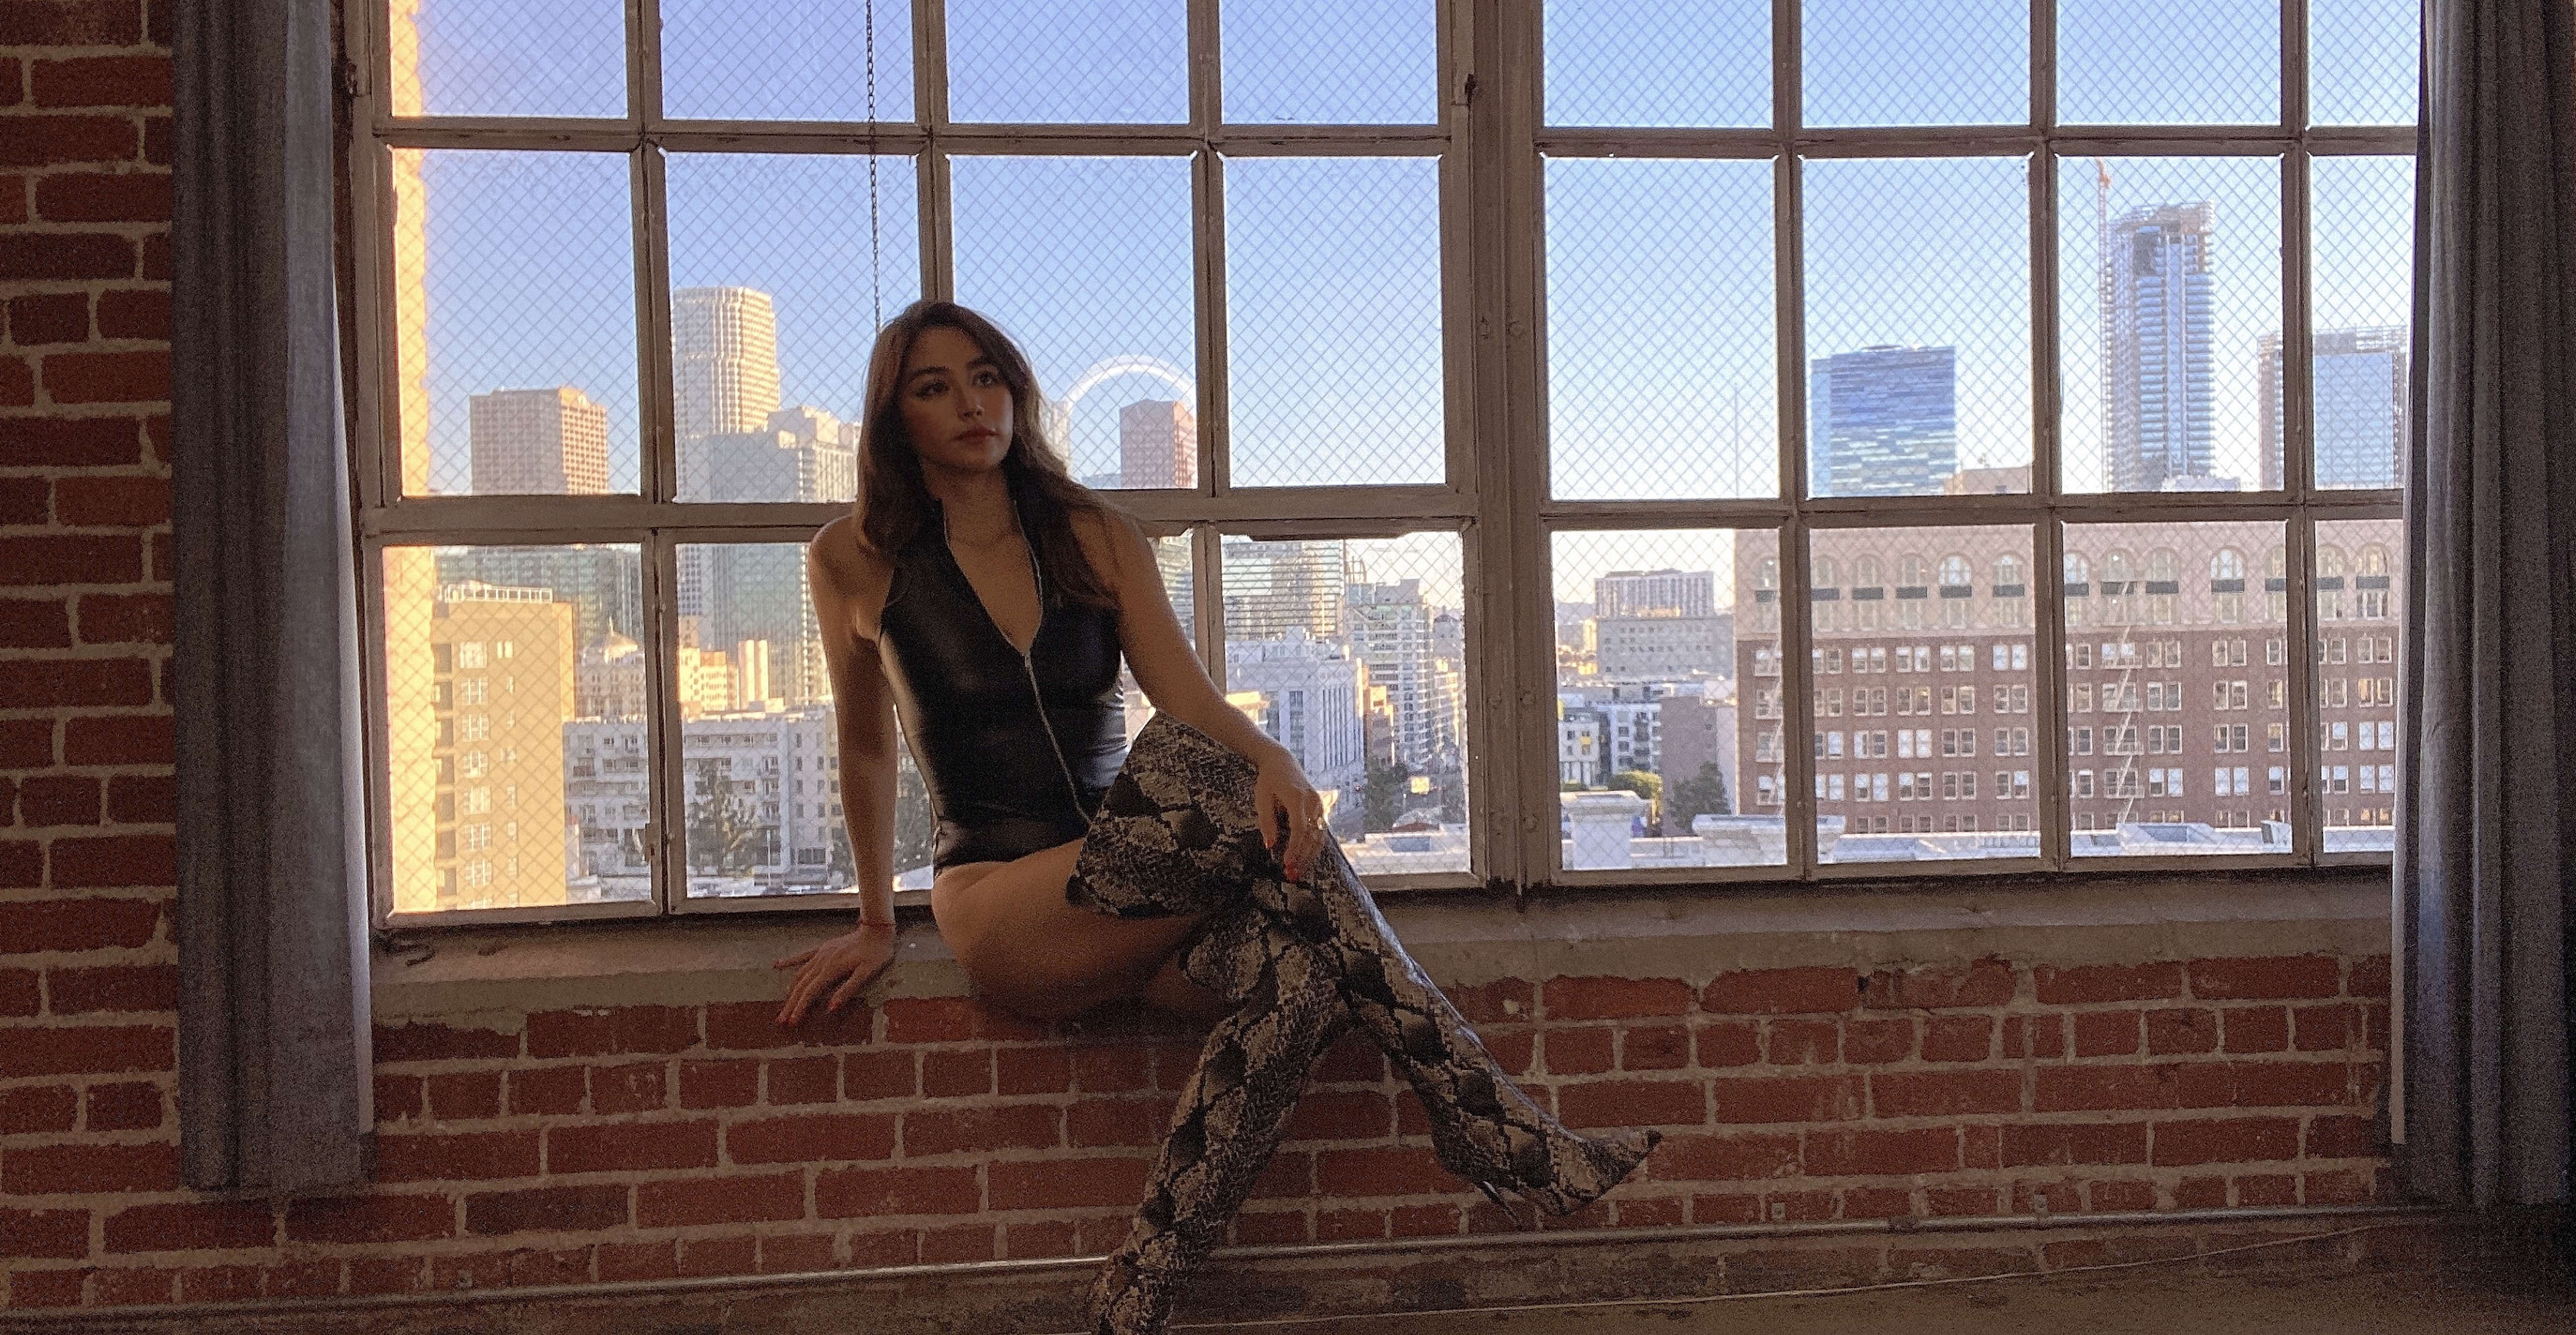 A model with tall boots posing on a window sill for a fashion photo shoot.